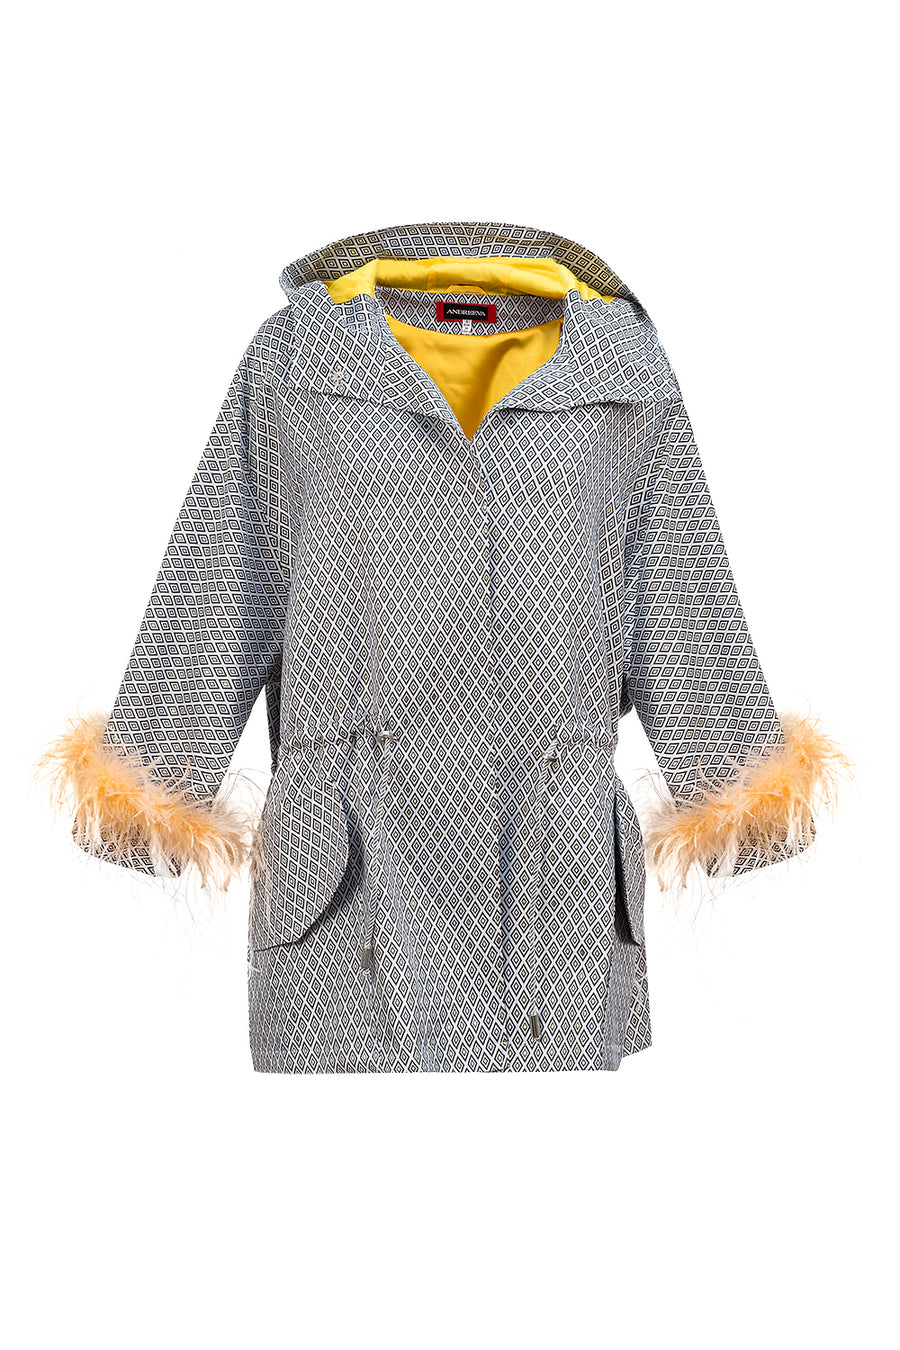 Grey parka with detachable feathers cuffs